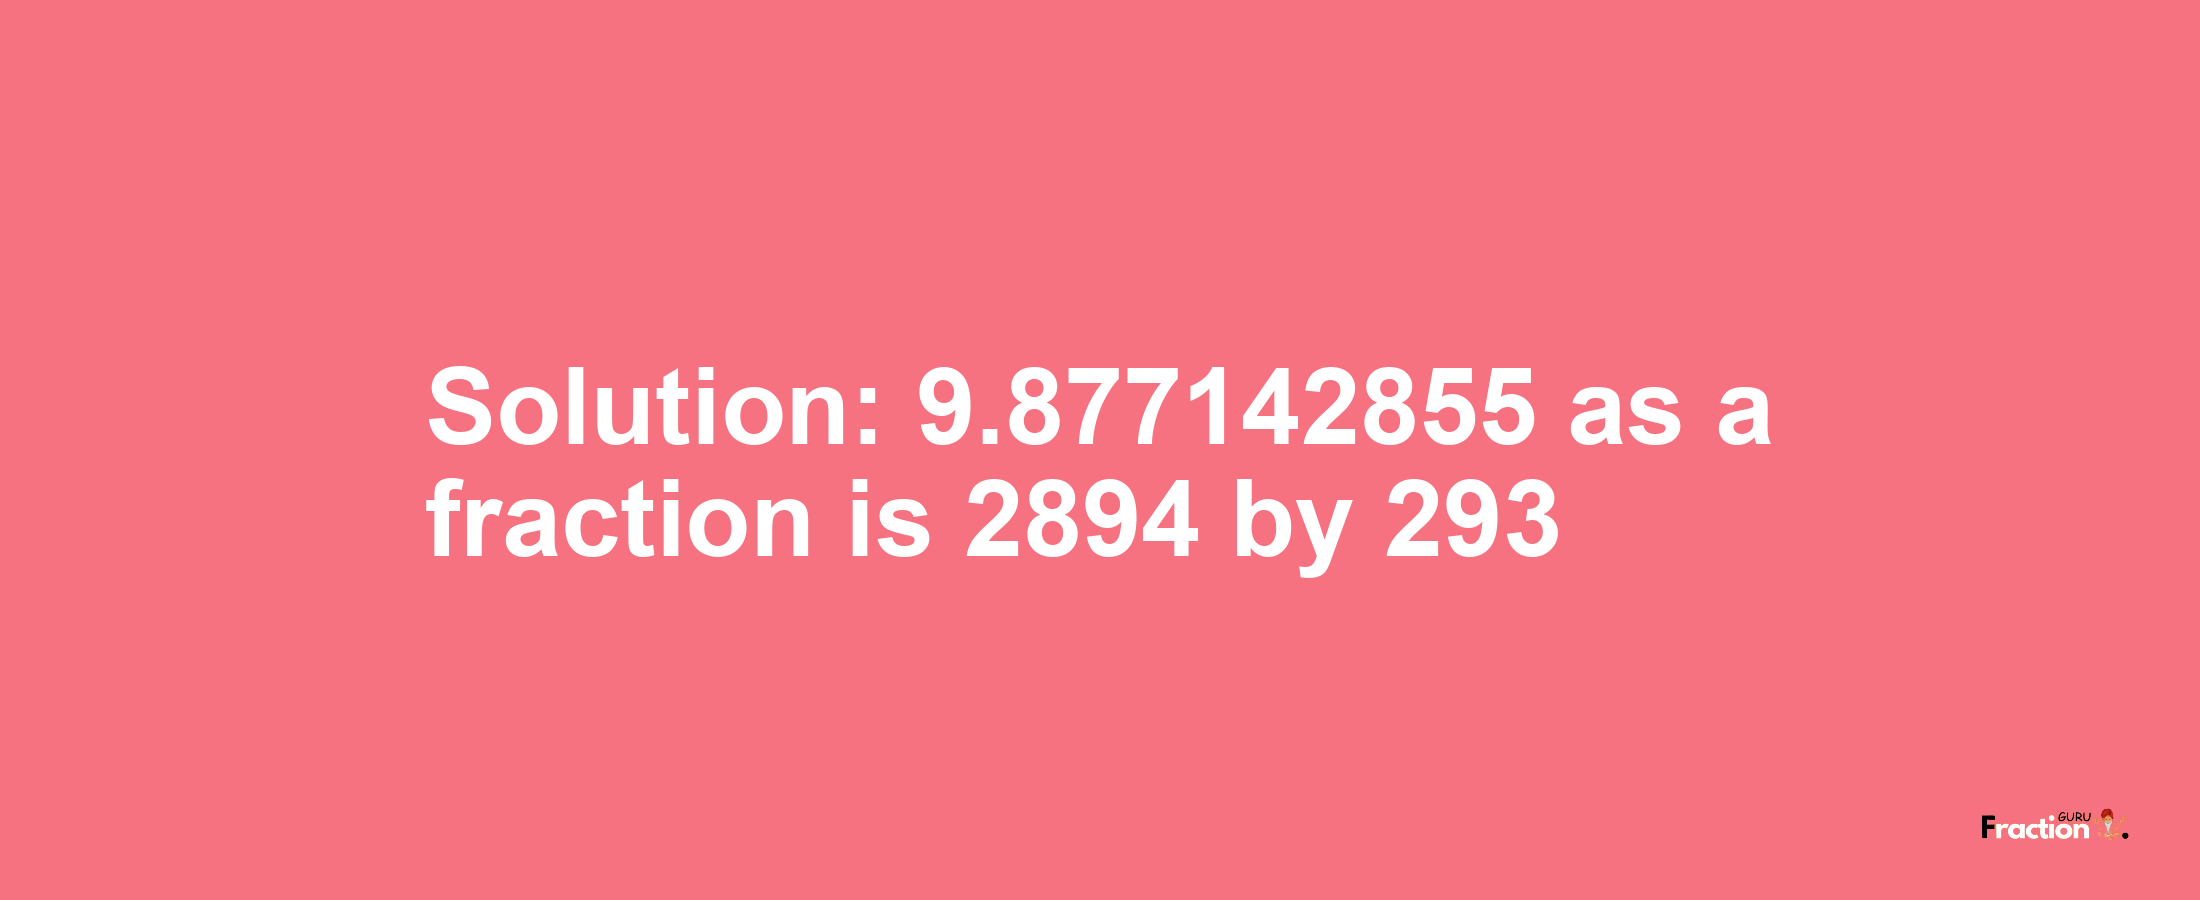 Solution:9.877142855 as a fraction is 2894/293